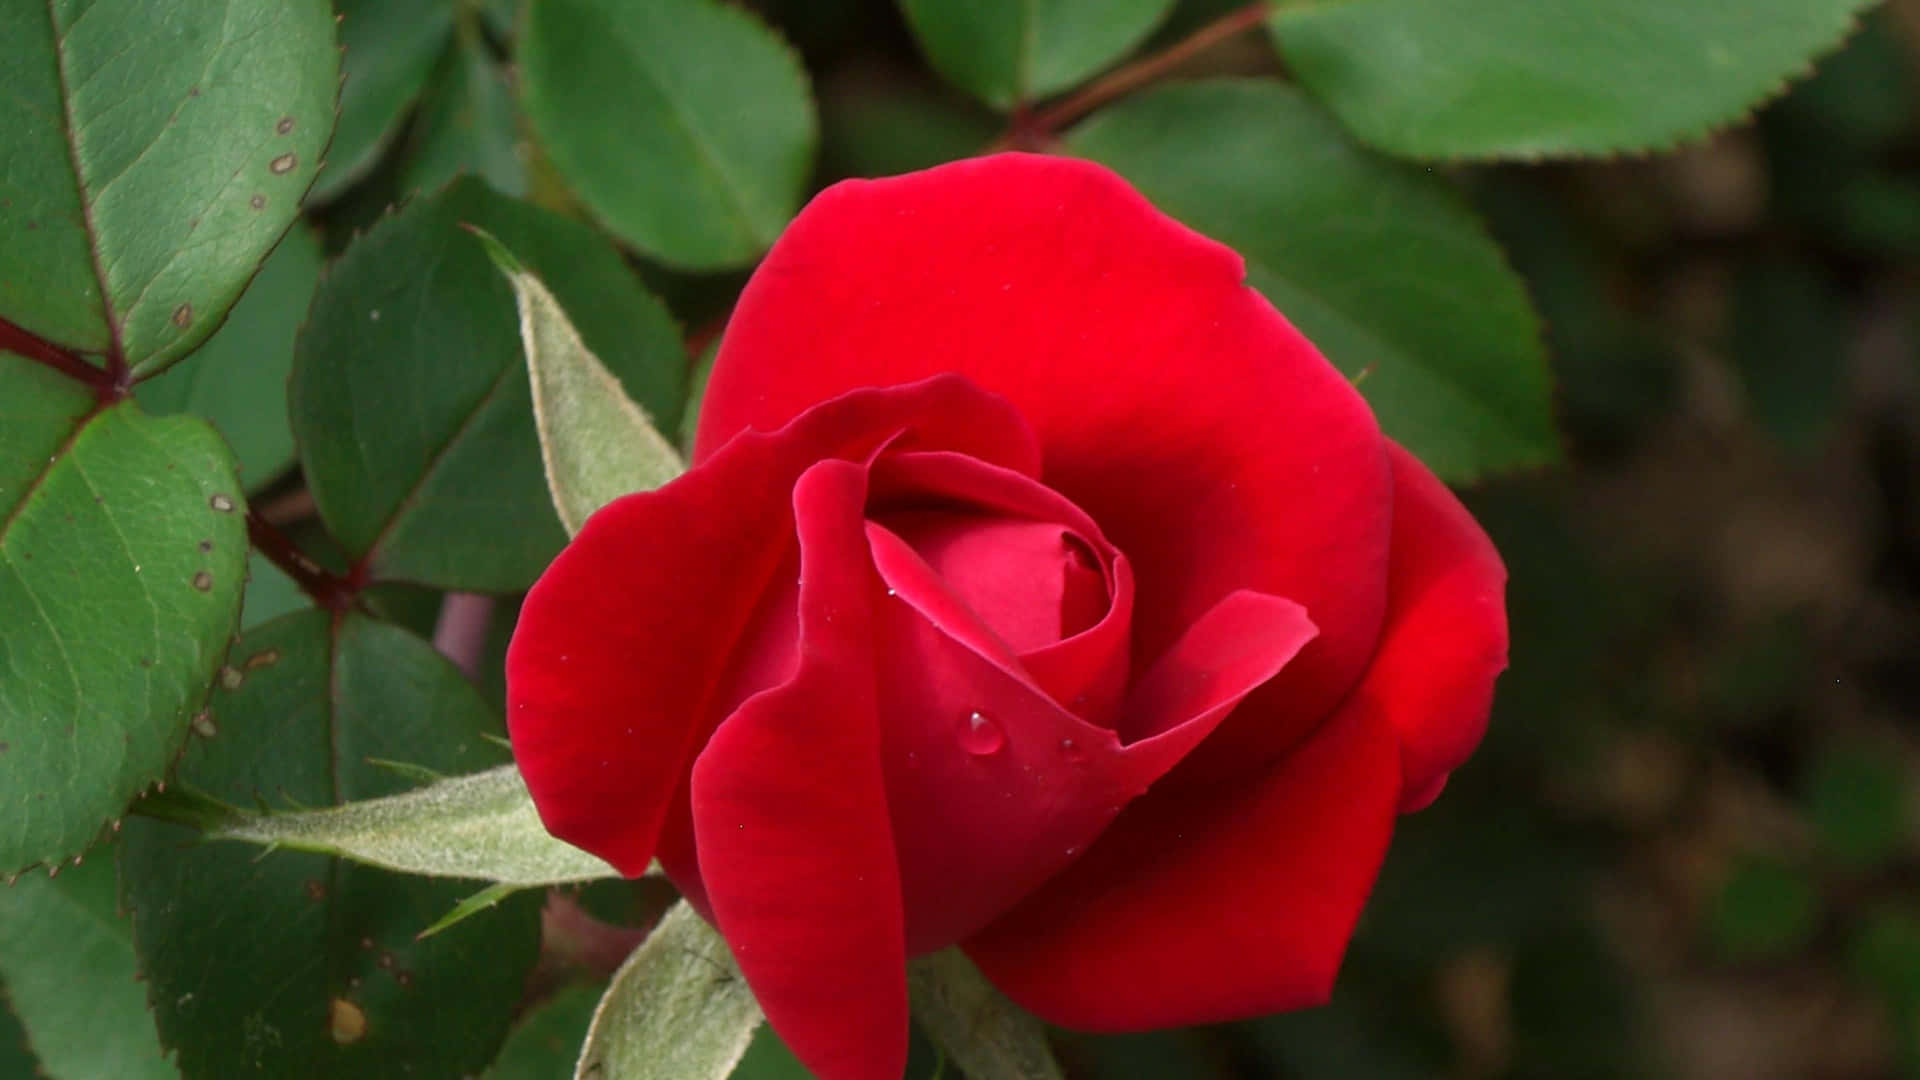 A beautiful red rose.